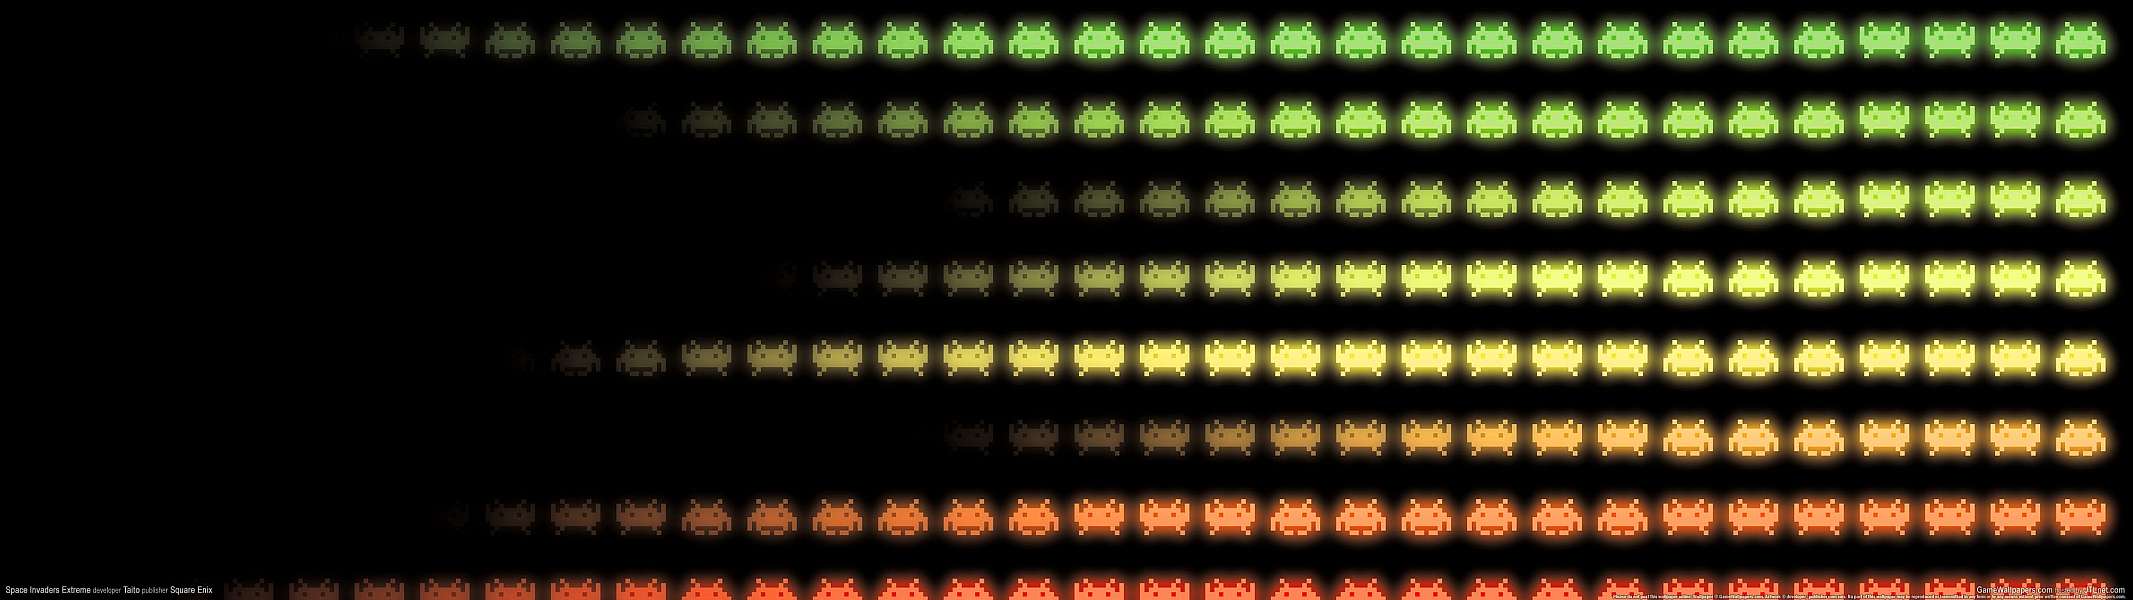 Space Invaders Extreme dual screen fond d'cran